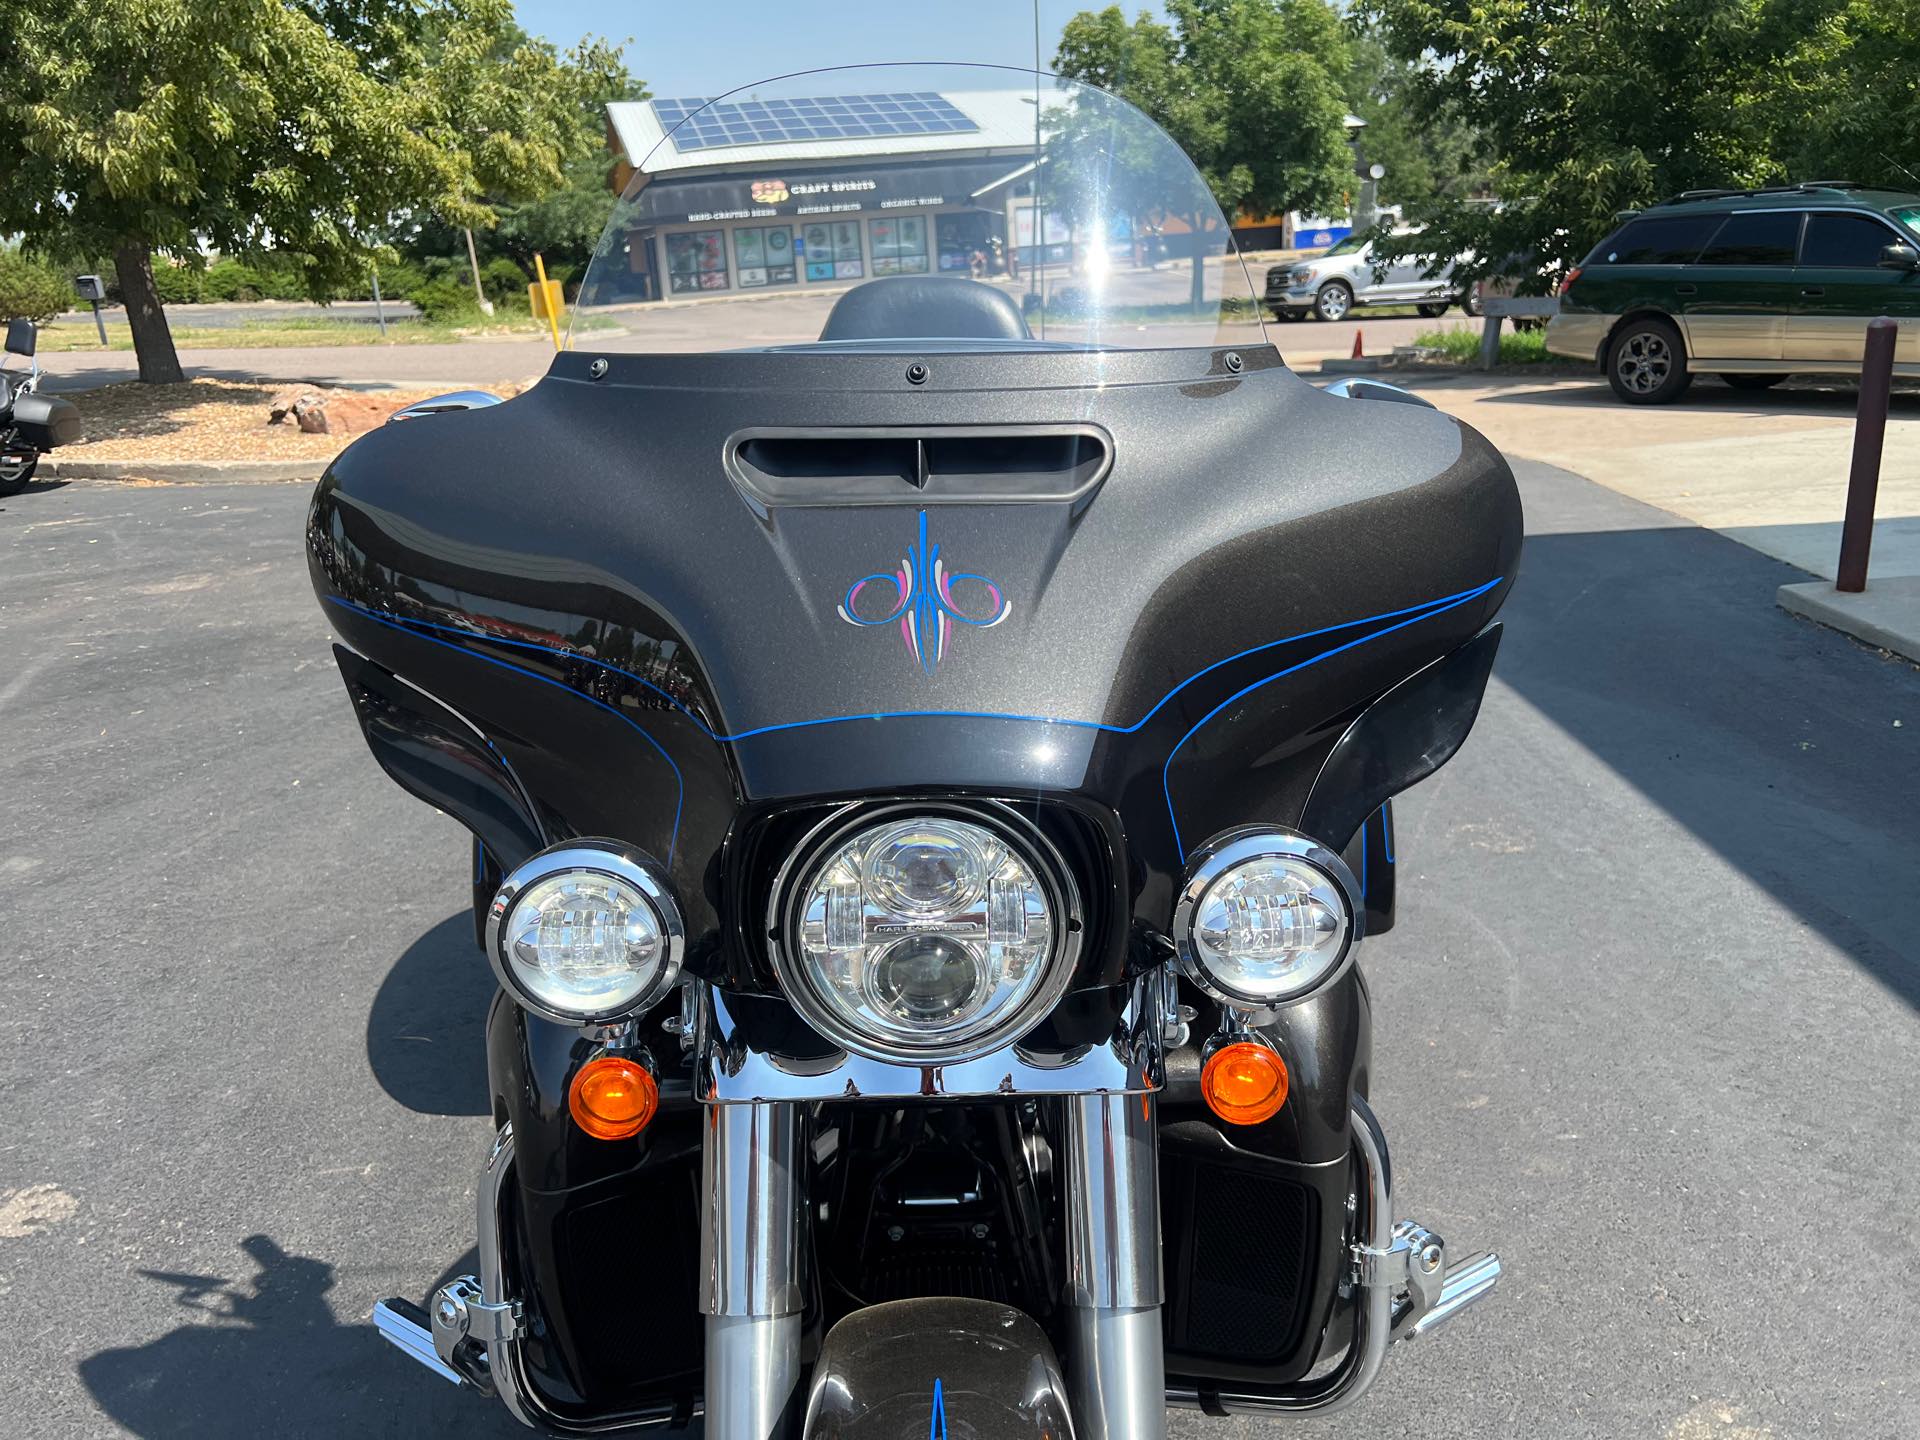 2019 Harley-Davidson Trike Tri Glide Ultra at Aces Motorcycles - Fort Collins